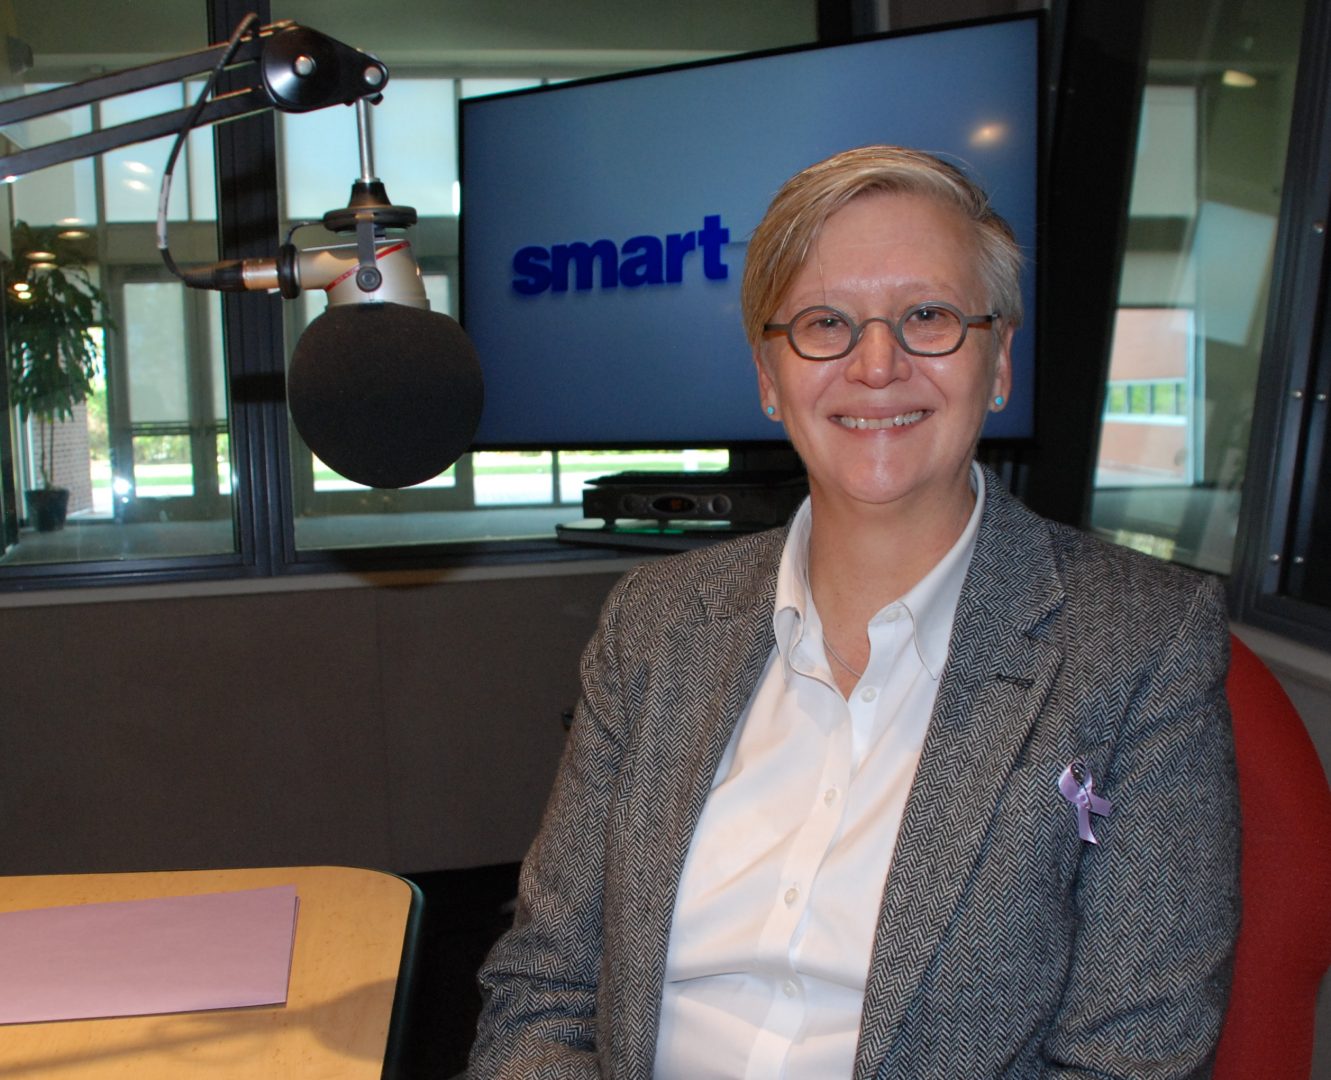  Susan Higgenbotham, CEO of the Pennsylvania Coalition Against Domestic Violence appears on Smart Talk on October 17, 2019